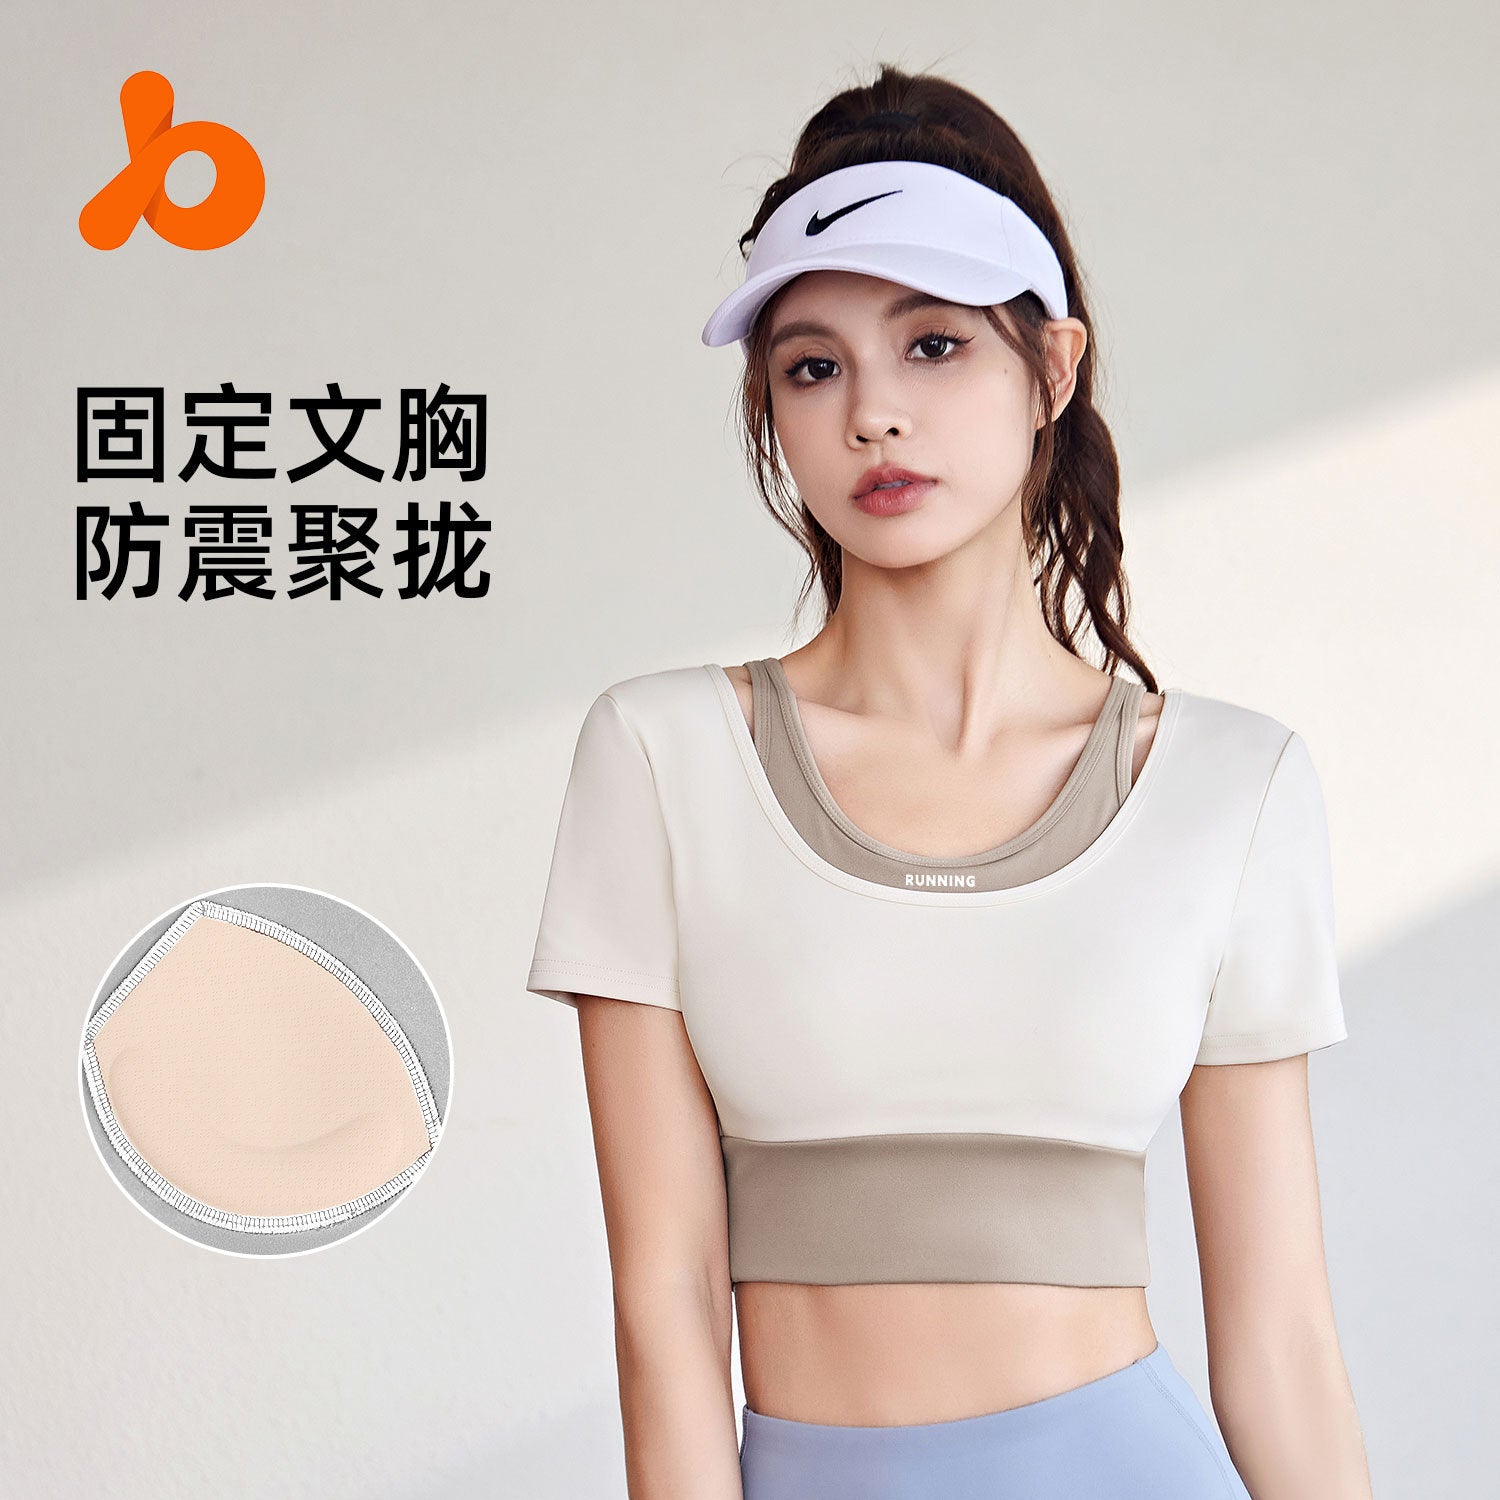 Juyitang Yoga Short Sleeve Color-Blocked Fake Two Sports Tops Quick Dry No Bra Seamless Yoga Gym Wear